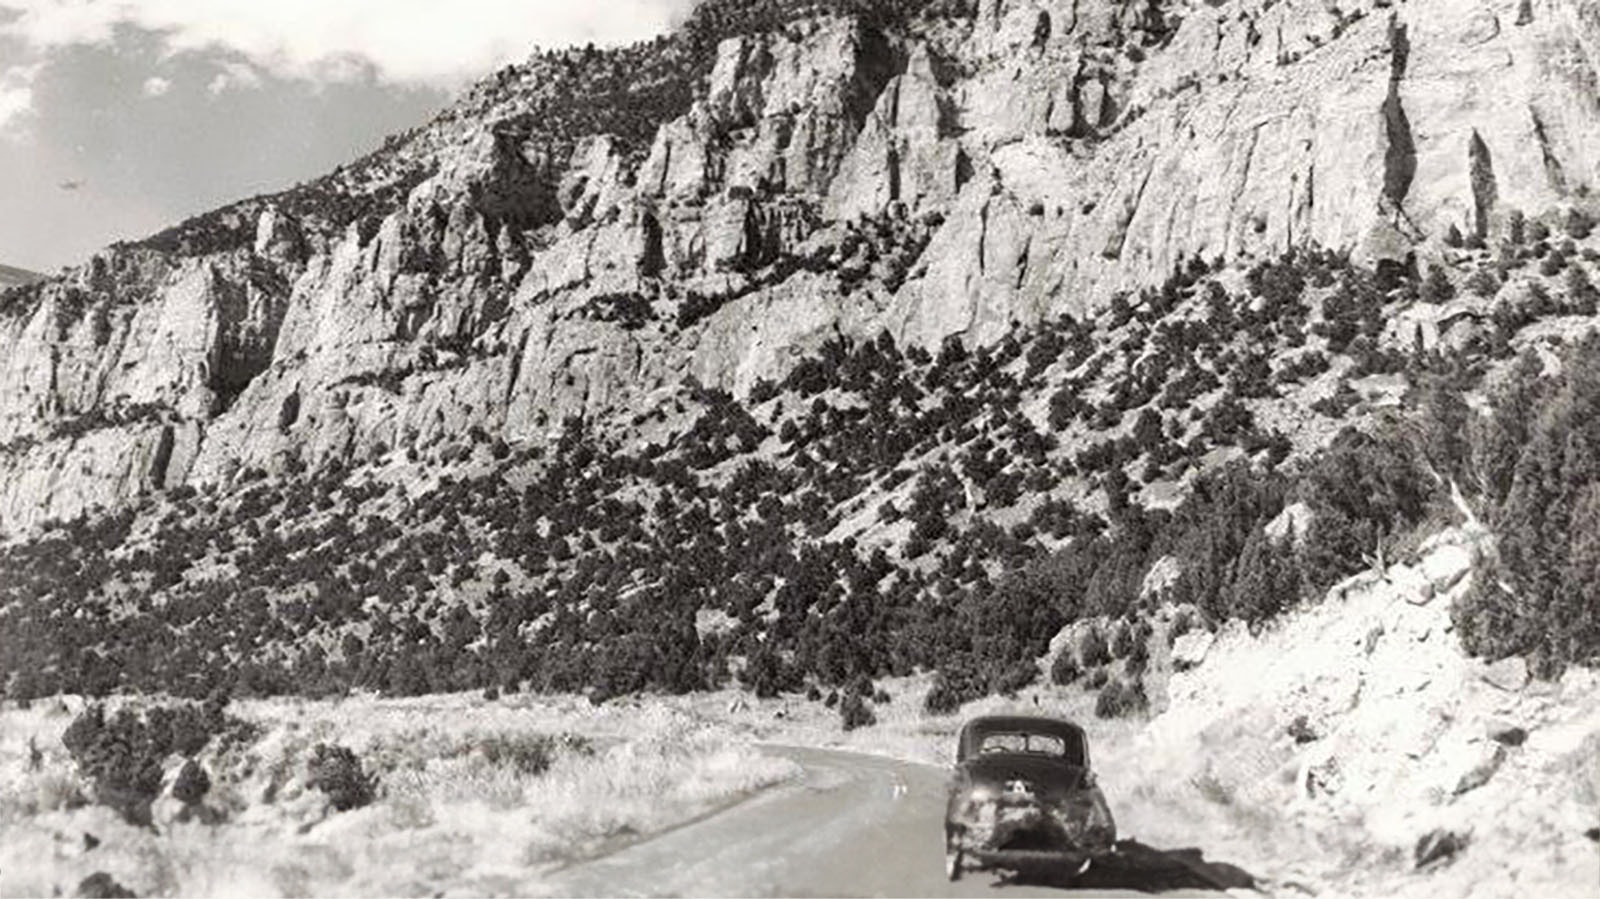 An undated photo showing a car driving to "J. Bob White's place" on the Yellowstone Highway in Wind River Canyon.